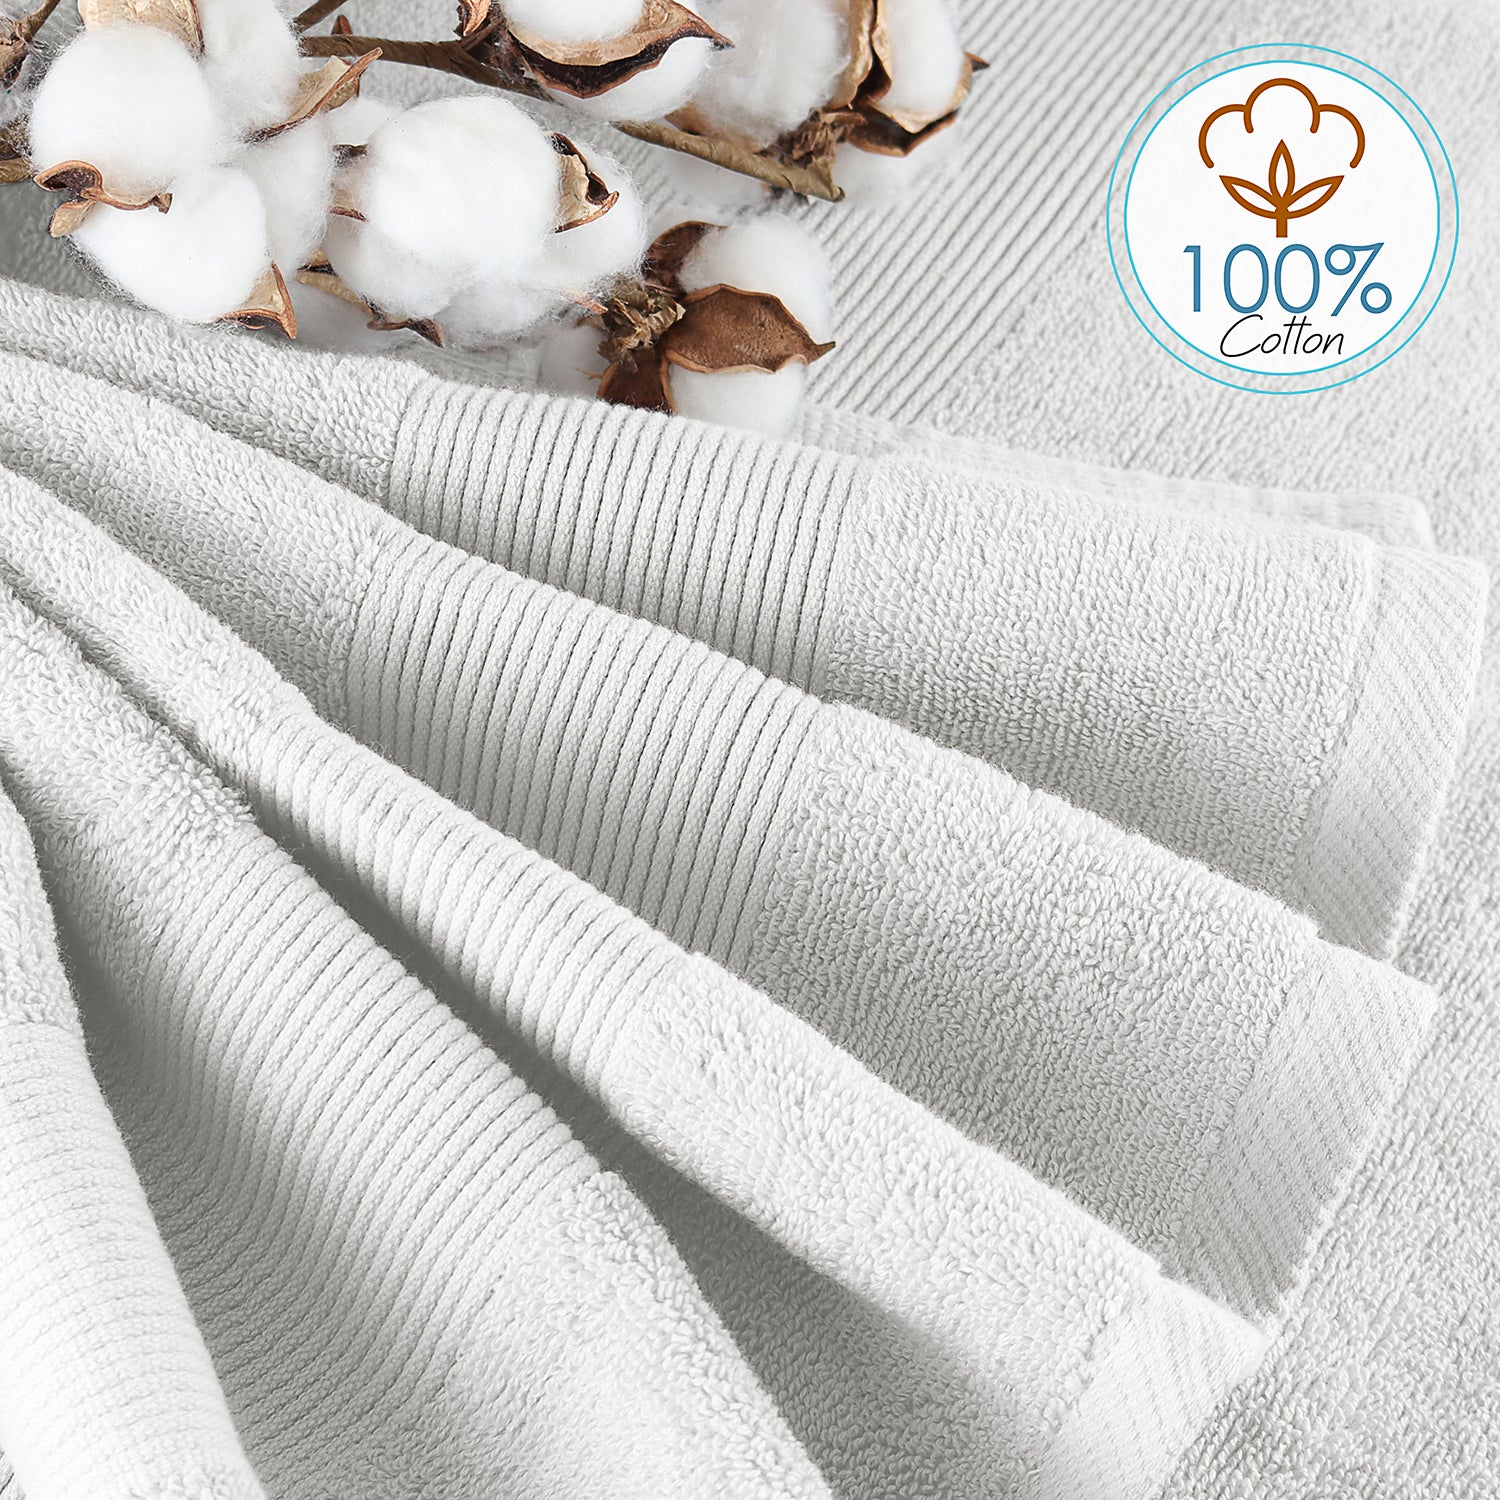 White 100% Cotton Quick Dry and Luxury Bath Towels (Pack of 4)